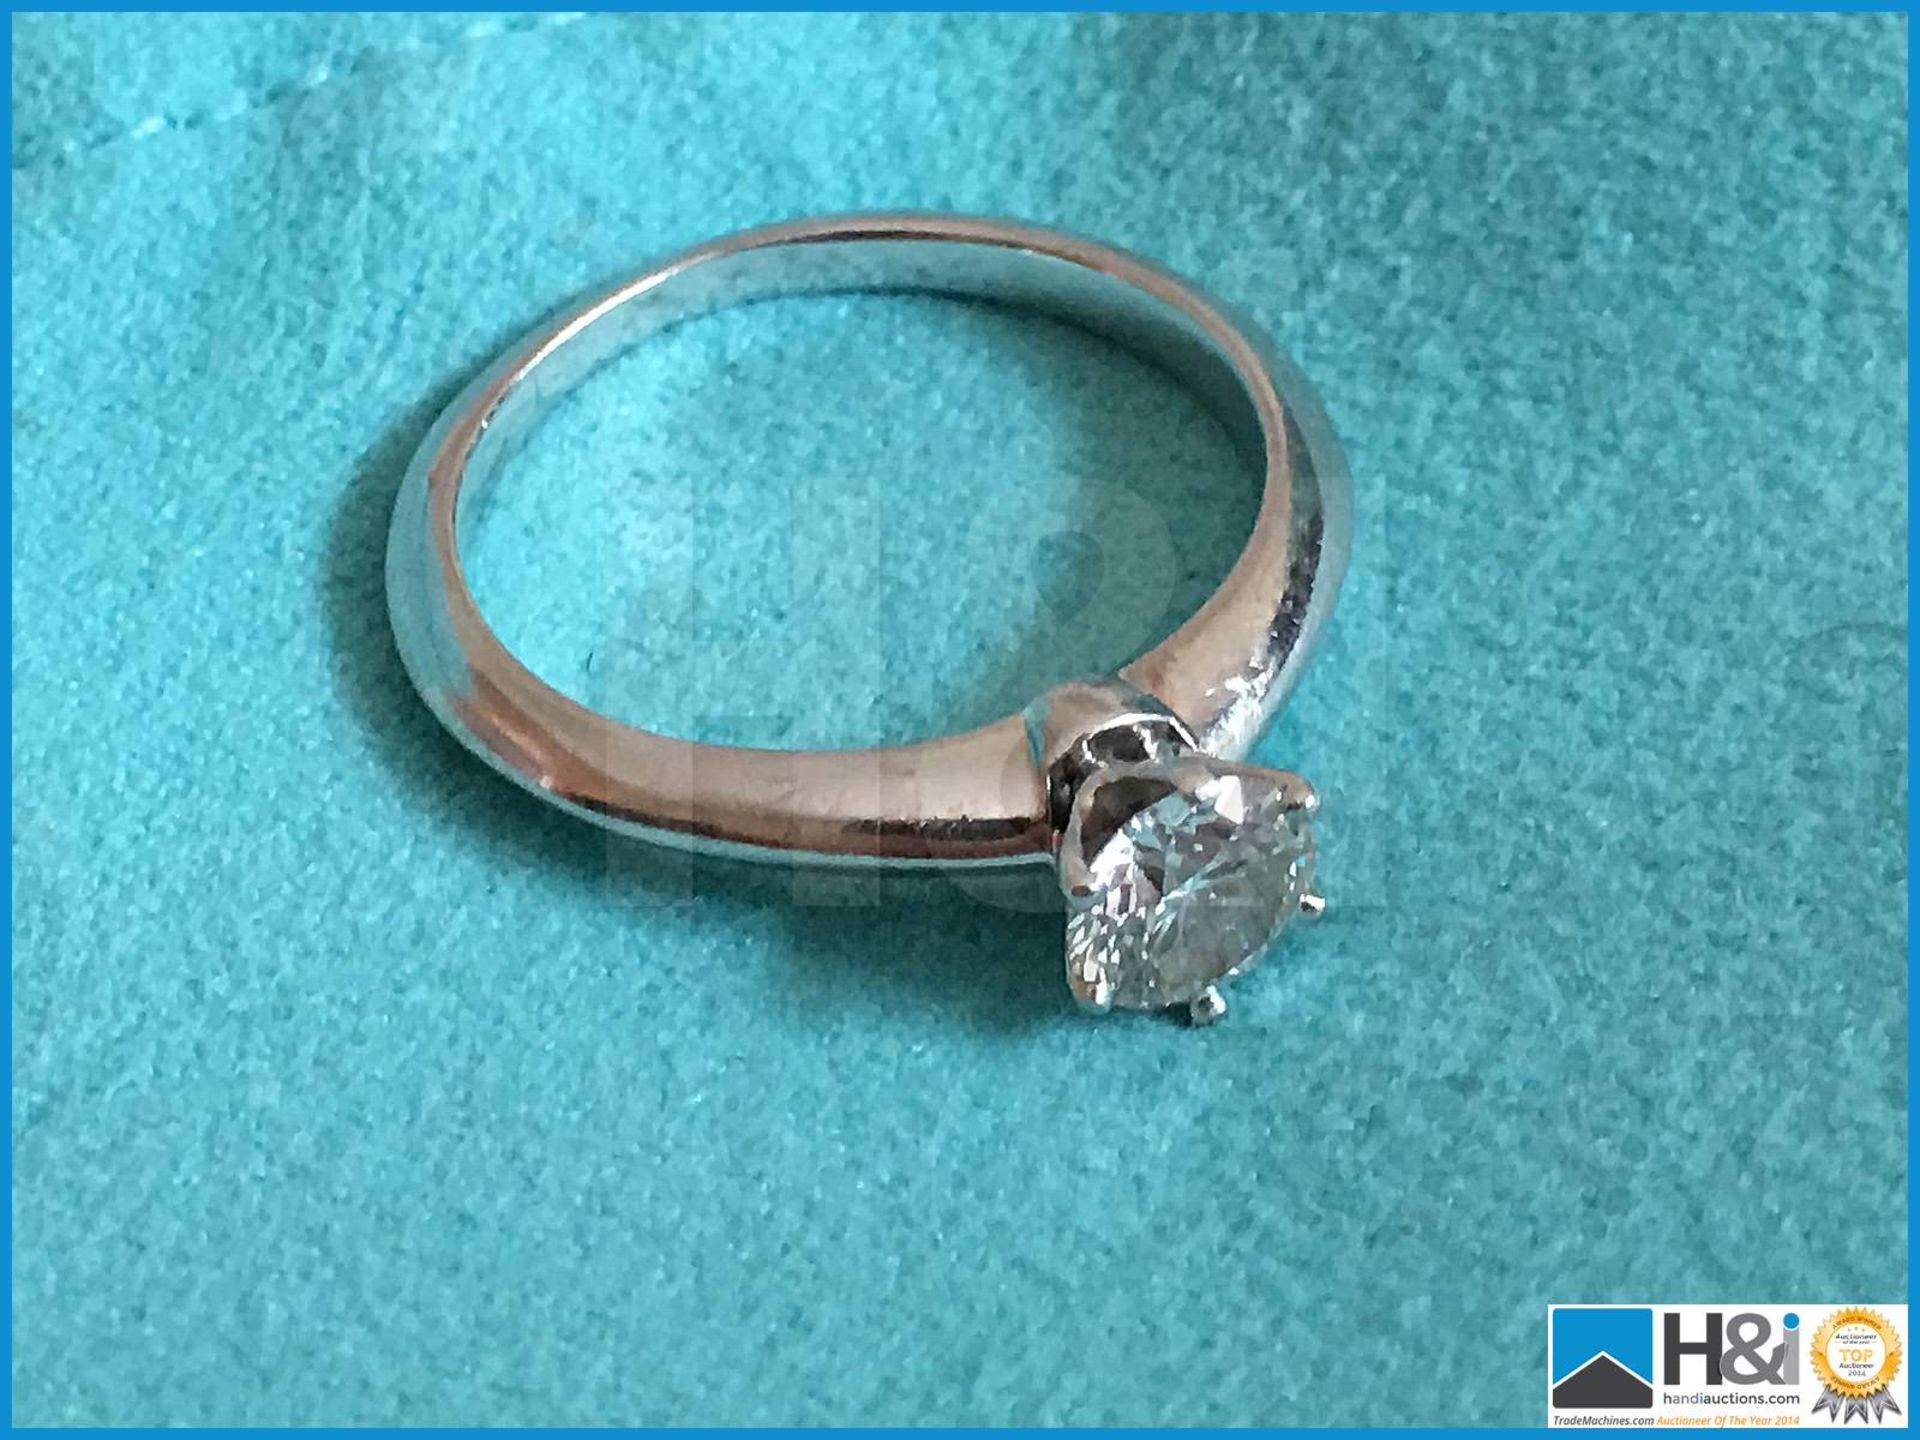 Genuine Tiffany classic iconic engagement ring in Platinum with 0.75 Carat Diamond purchased from Ti - Image 7 of 8